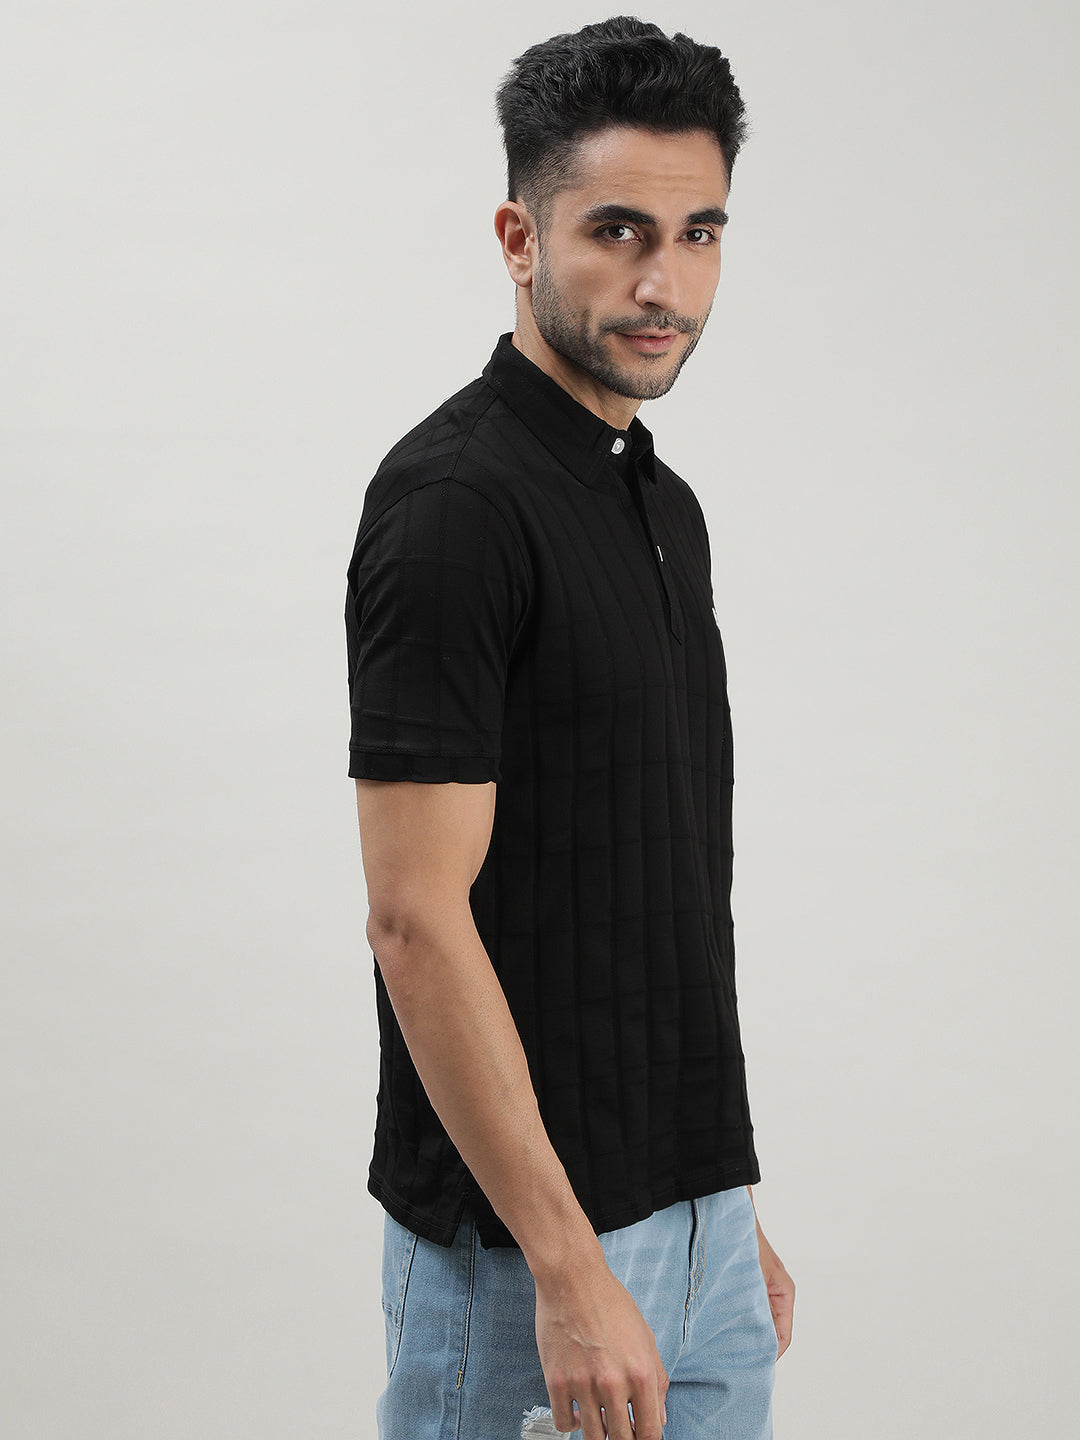 Black Polo T-shirt for Men at Loom & Spin